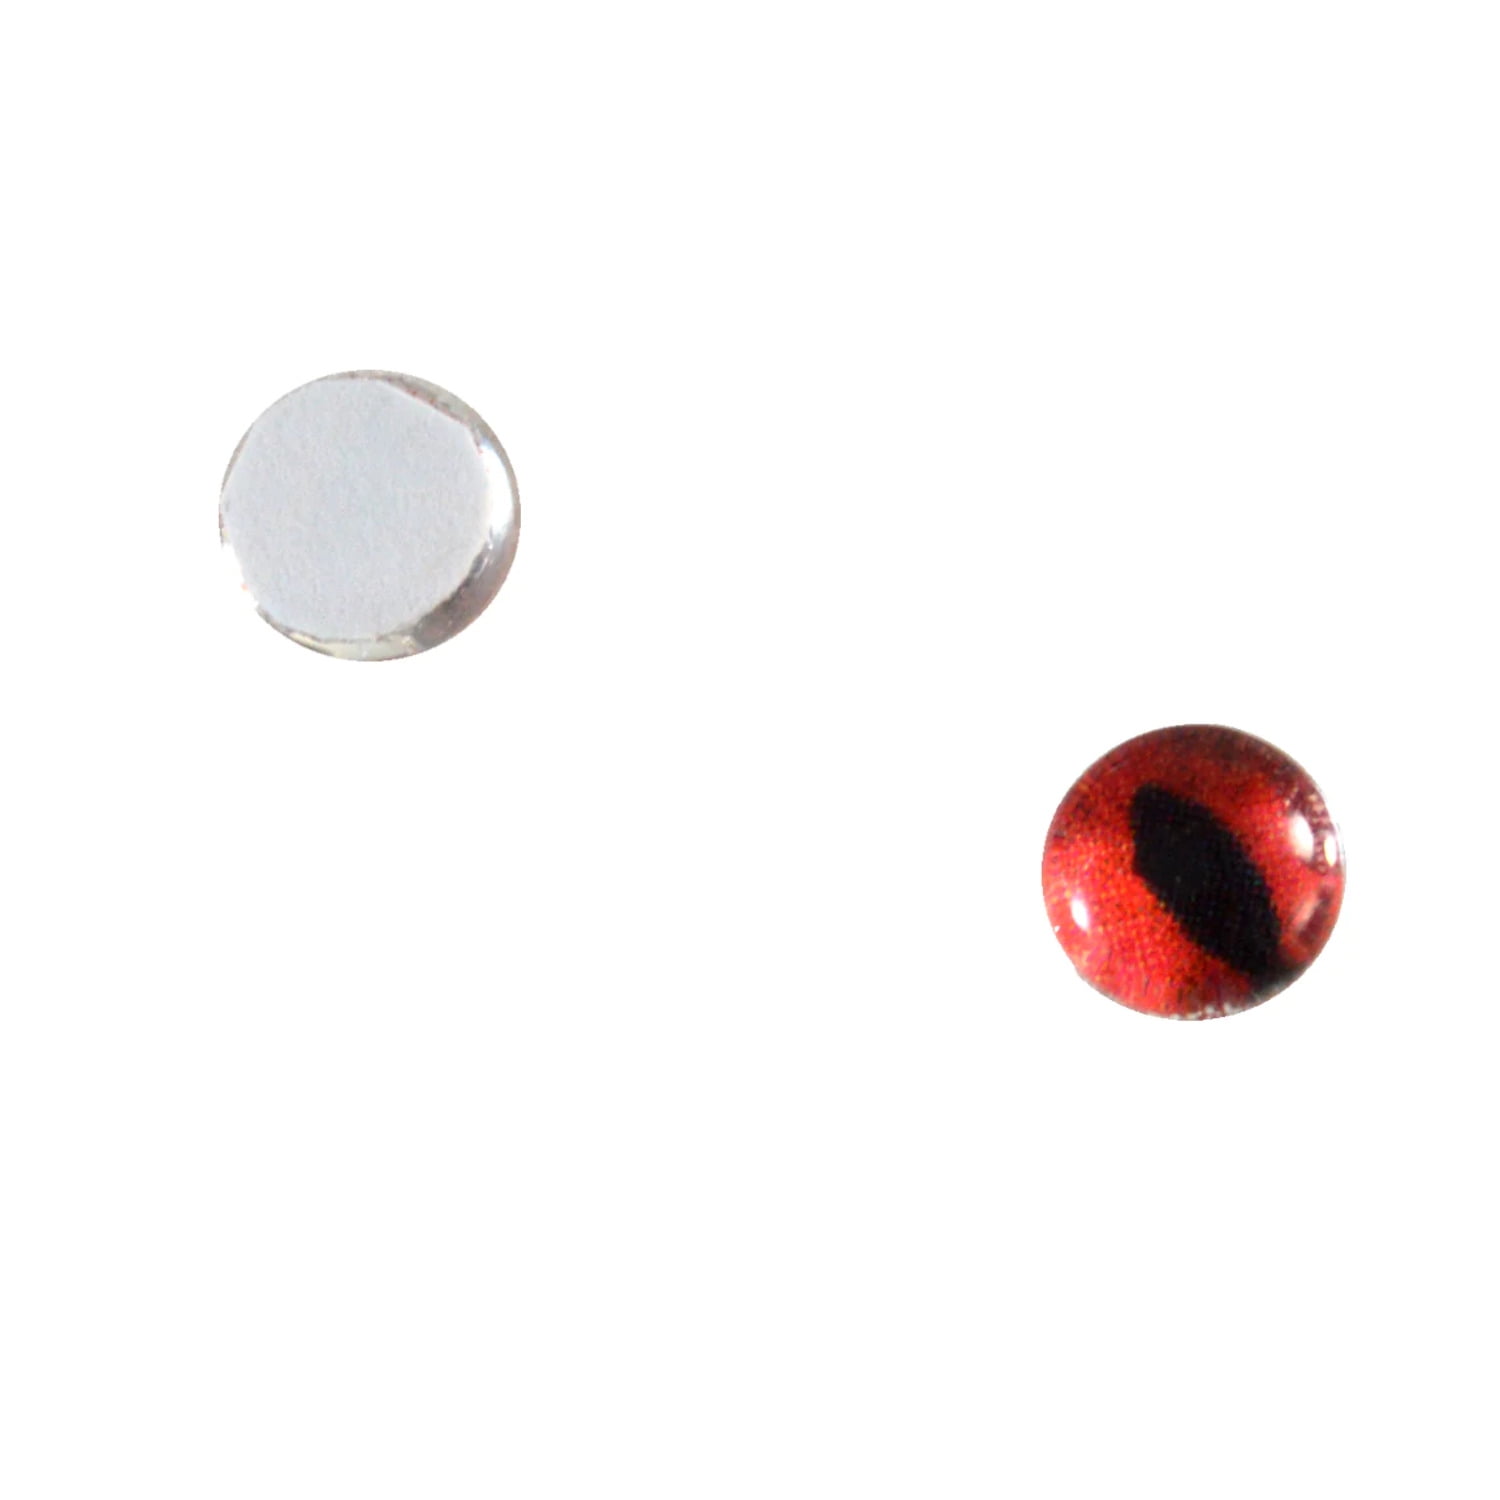 Red Directional Eyes 3mm-6mm 300pk